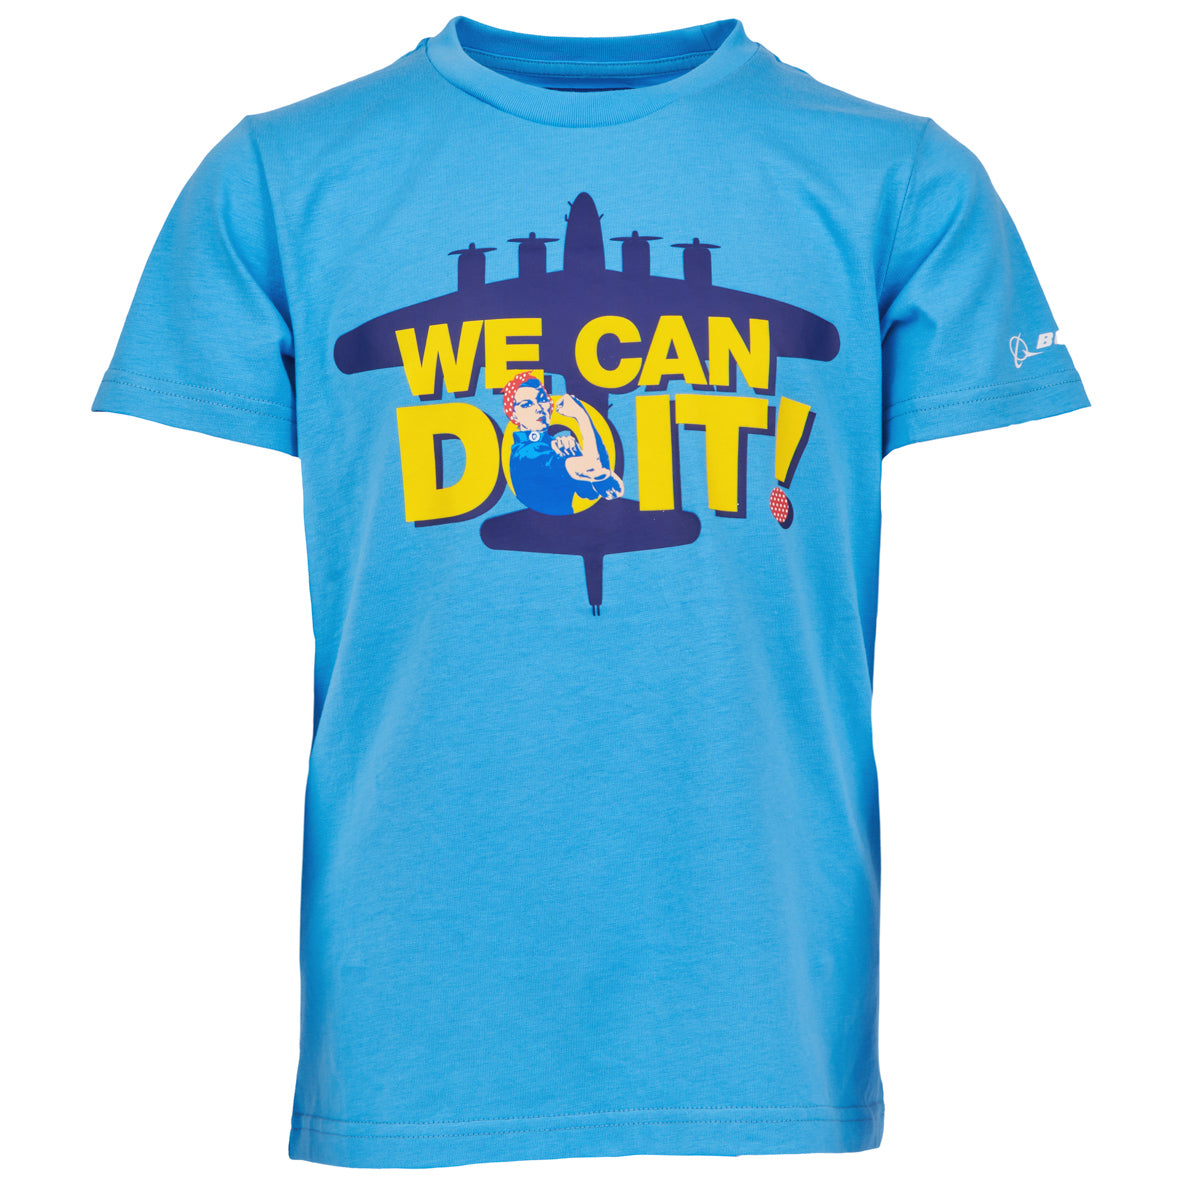 We can do it Rosie quote overlay on a Boeing B-17 aircraft printed on a blue t-shirt. across the chest  